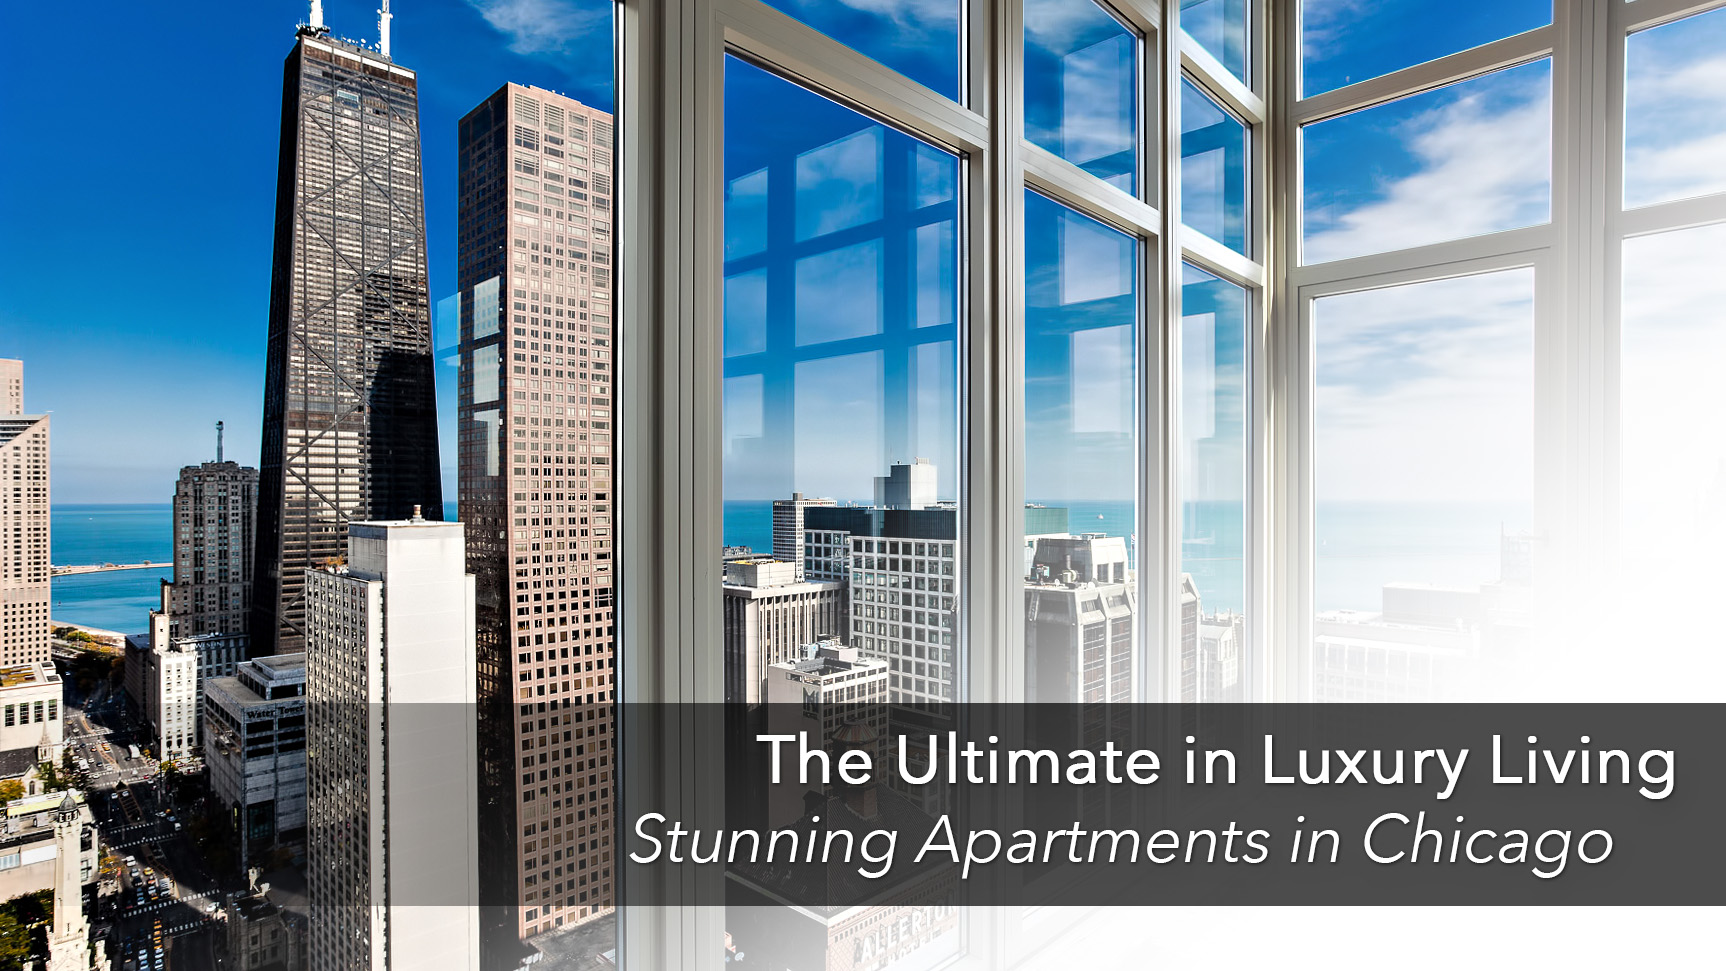 The Ultimate in Luxury Living – Stunning Apartments in Chicago